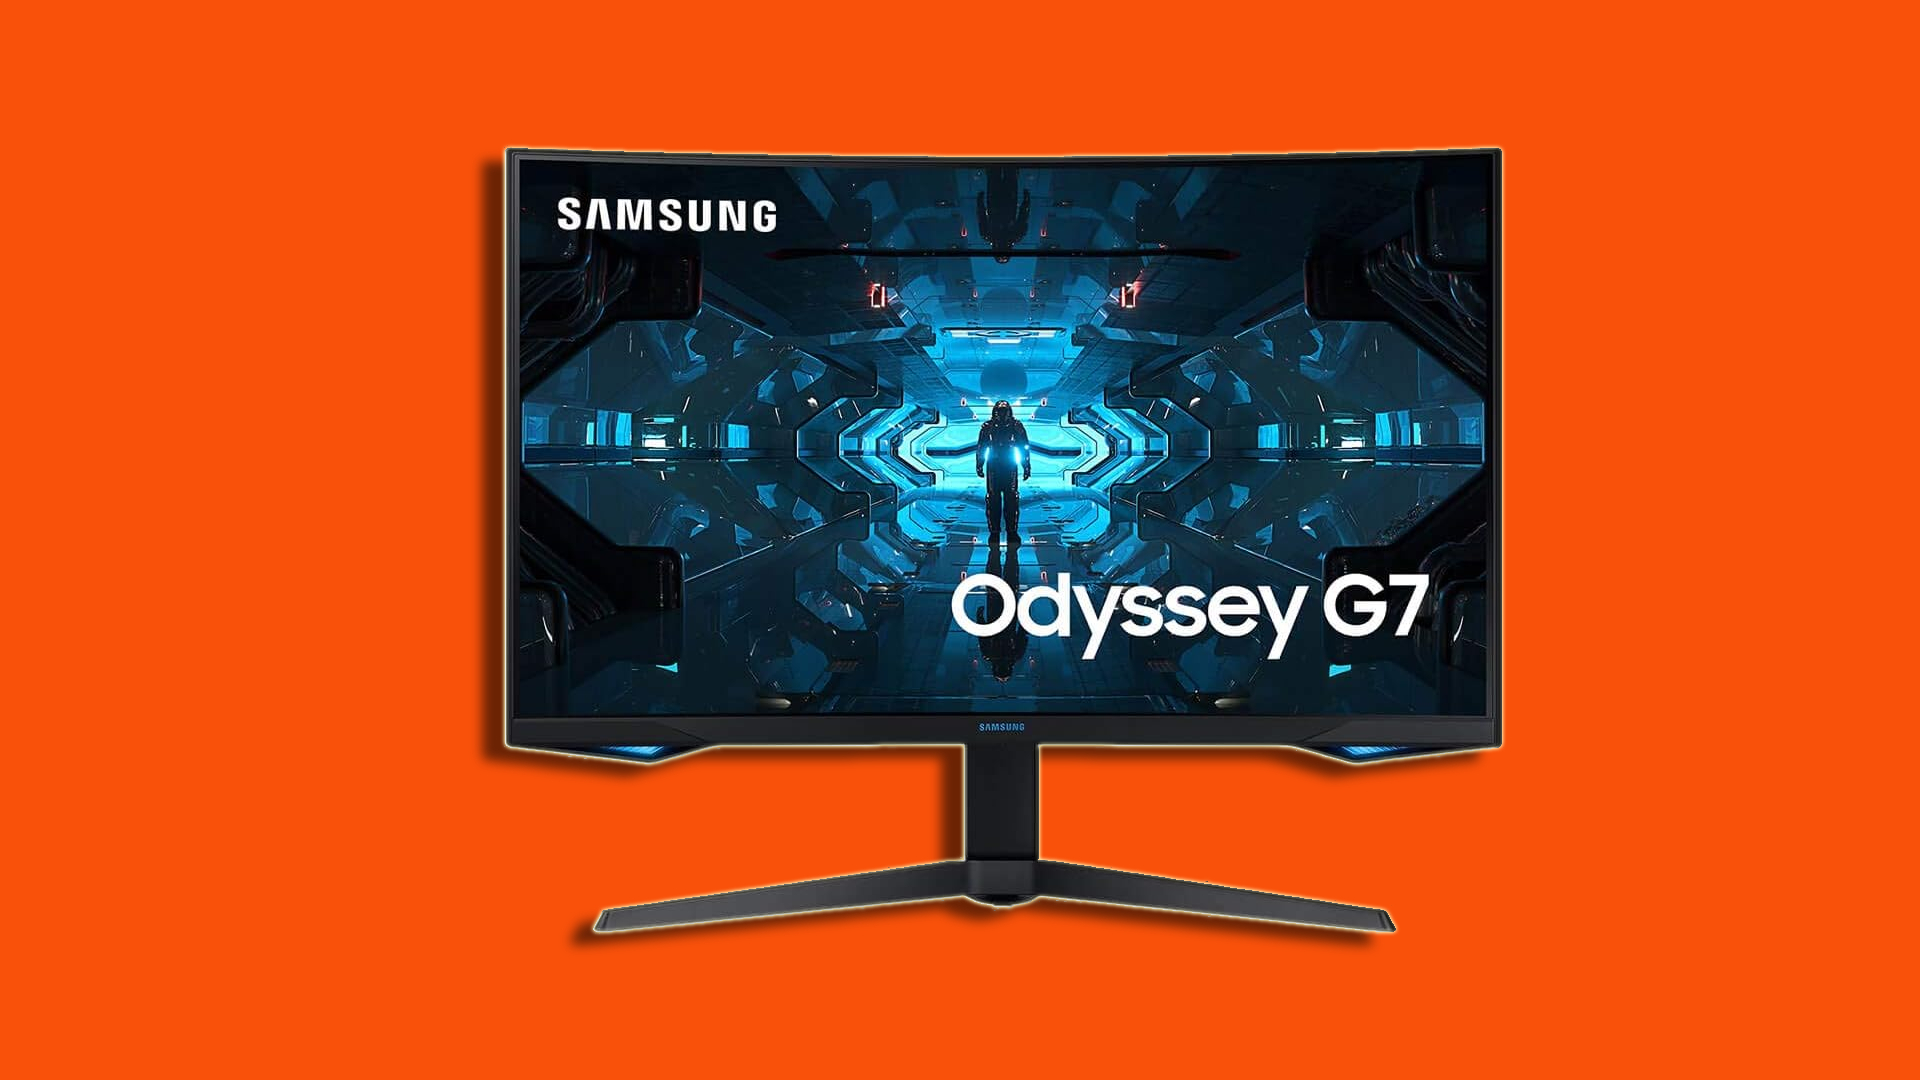 This Samsung Odyssey G7 monitor is at its lowest-ever price